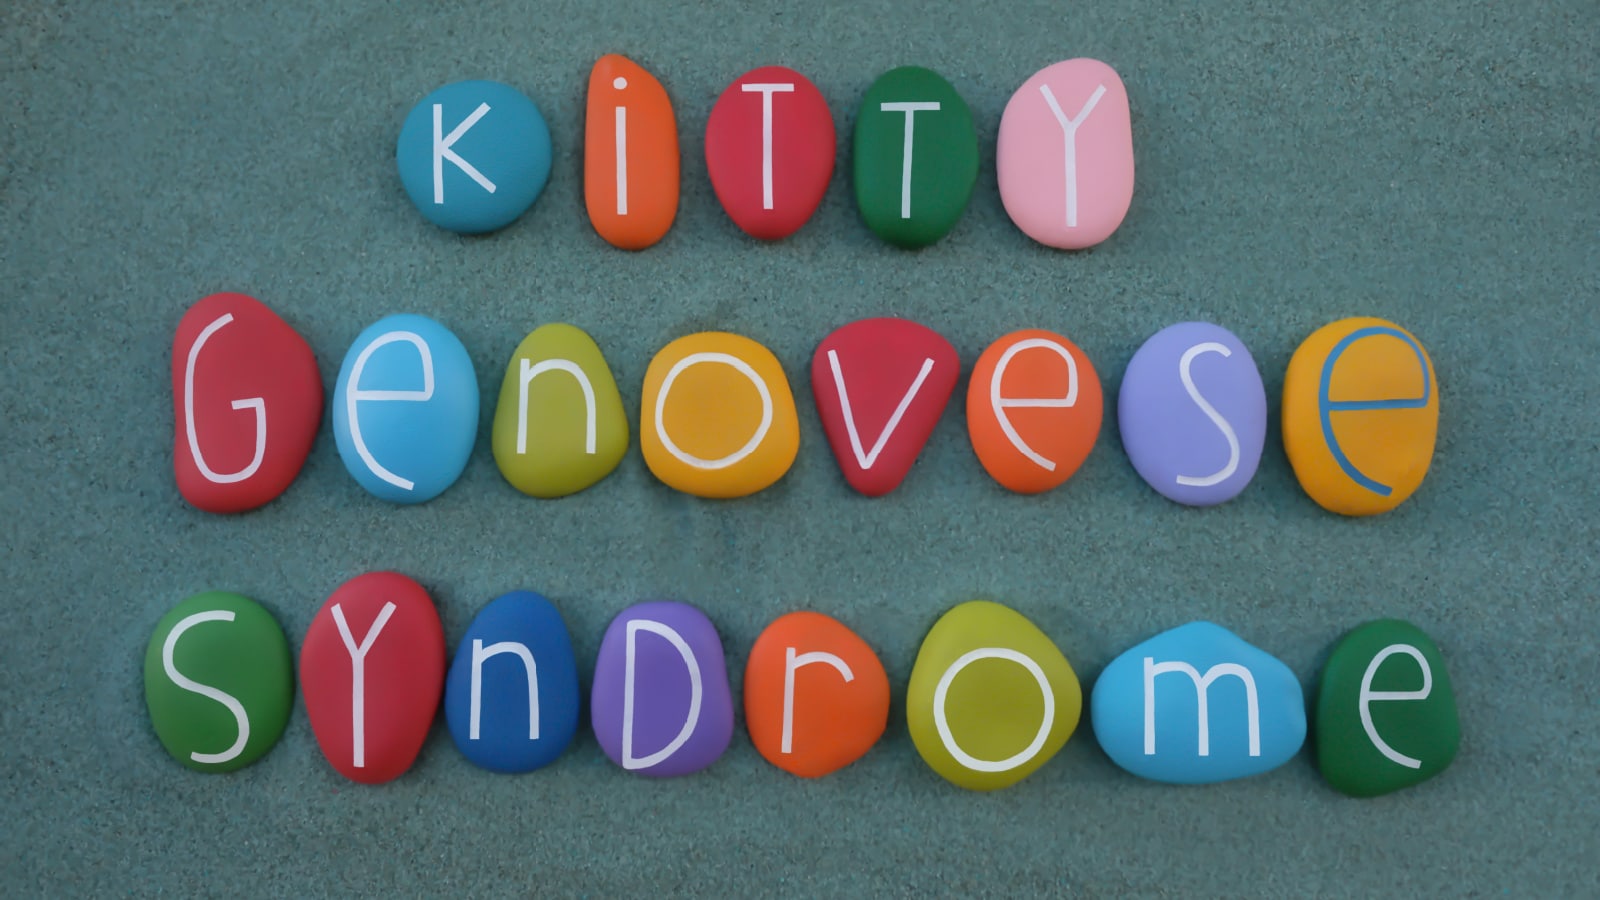 Kitty Genovese Syndrome text composed with multi colored stone letters on green sand